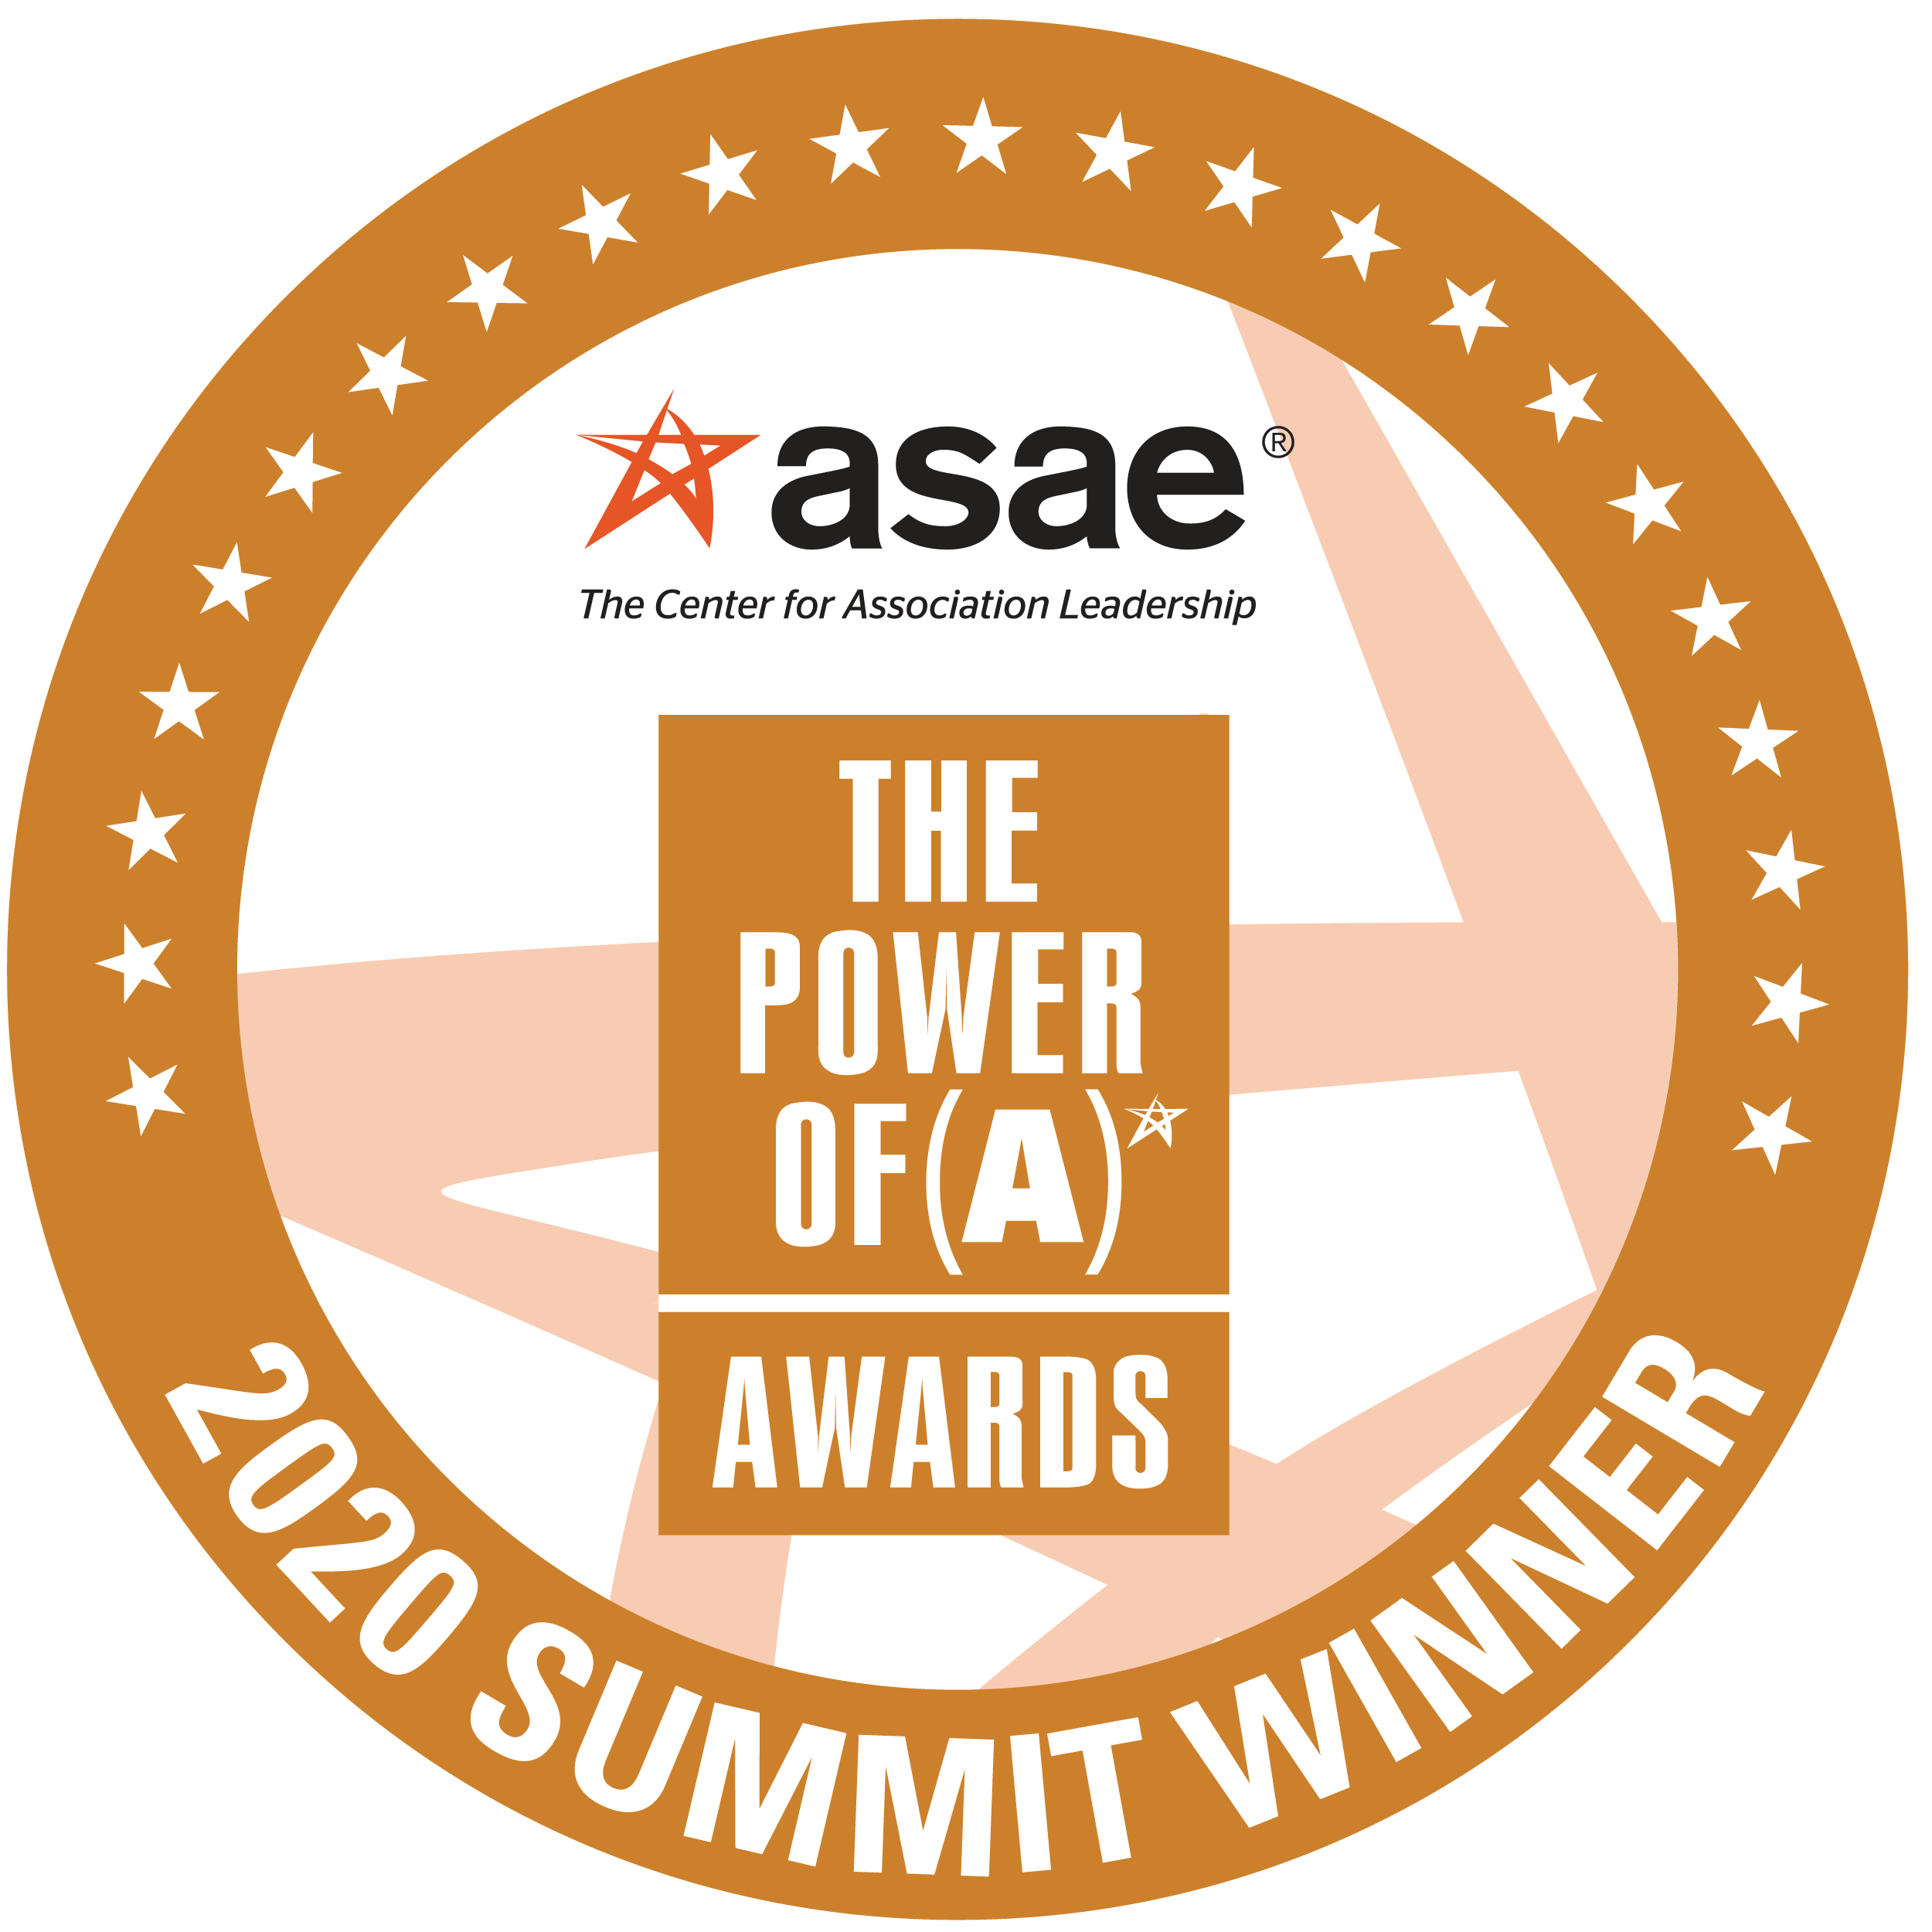 https://www.publicpower.org/system/files/documents/POA-2020-Summit-Award-Badge-Transparent.png